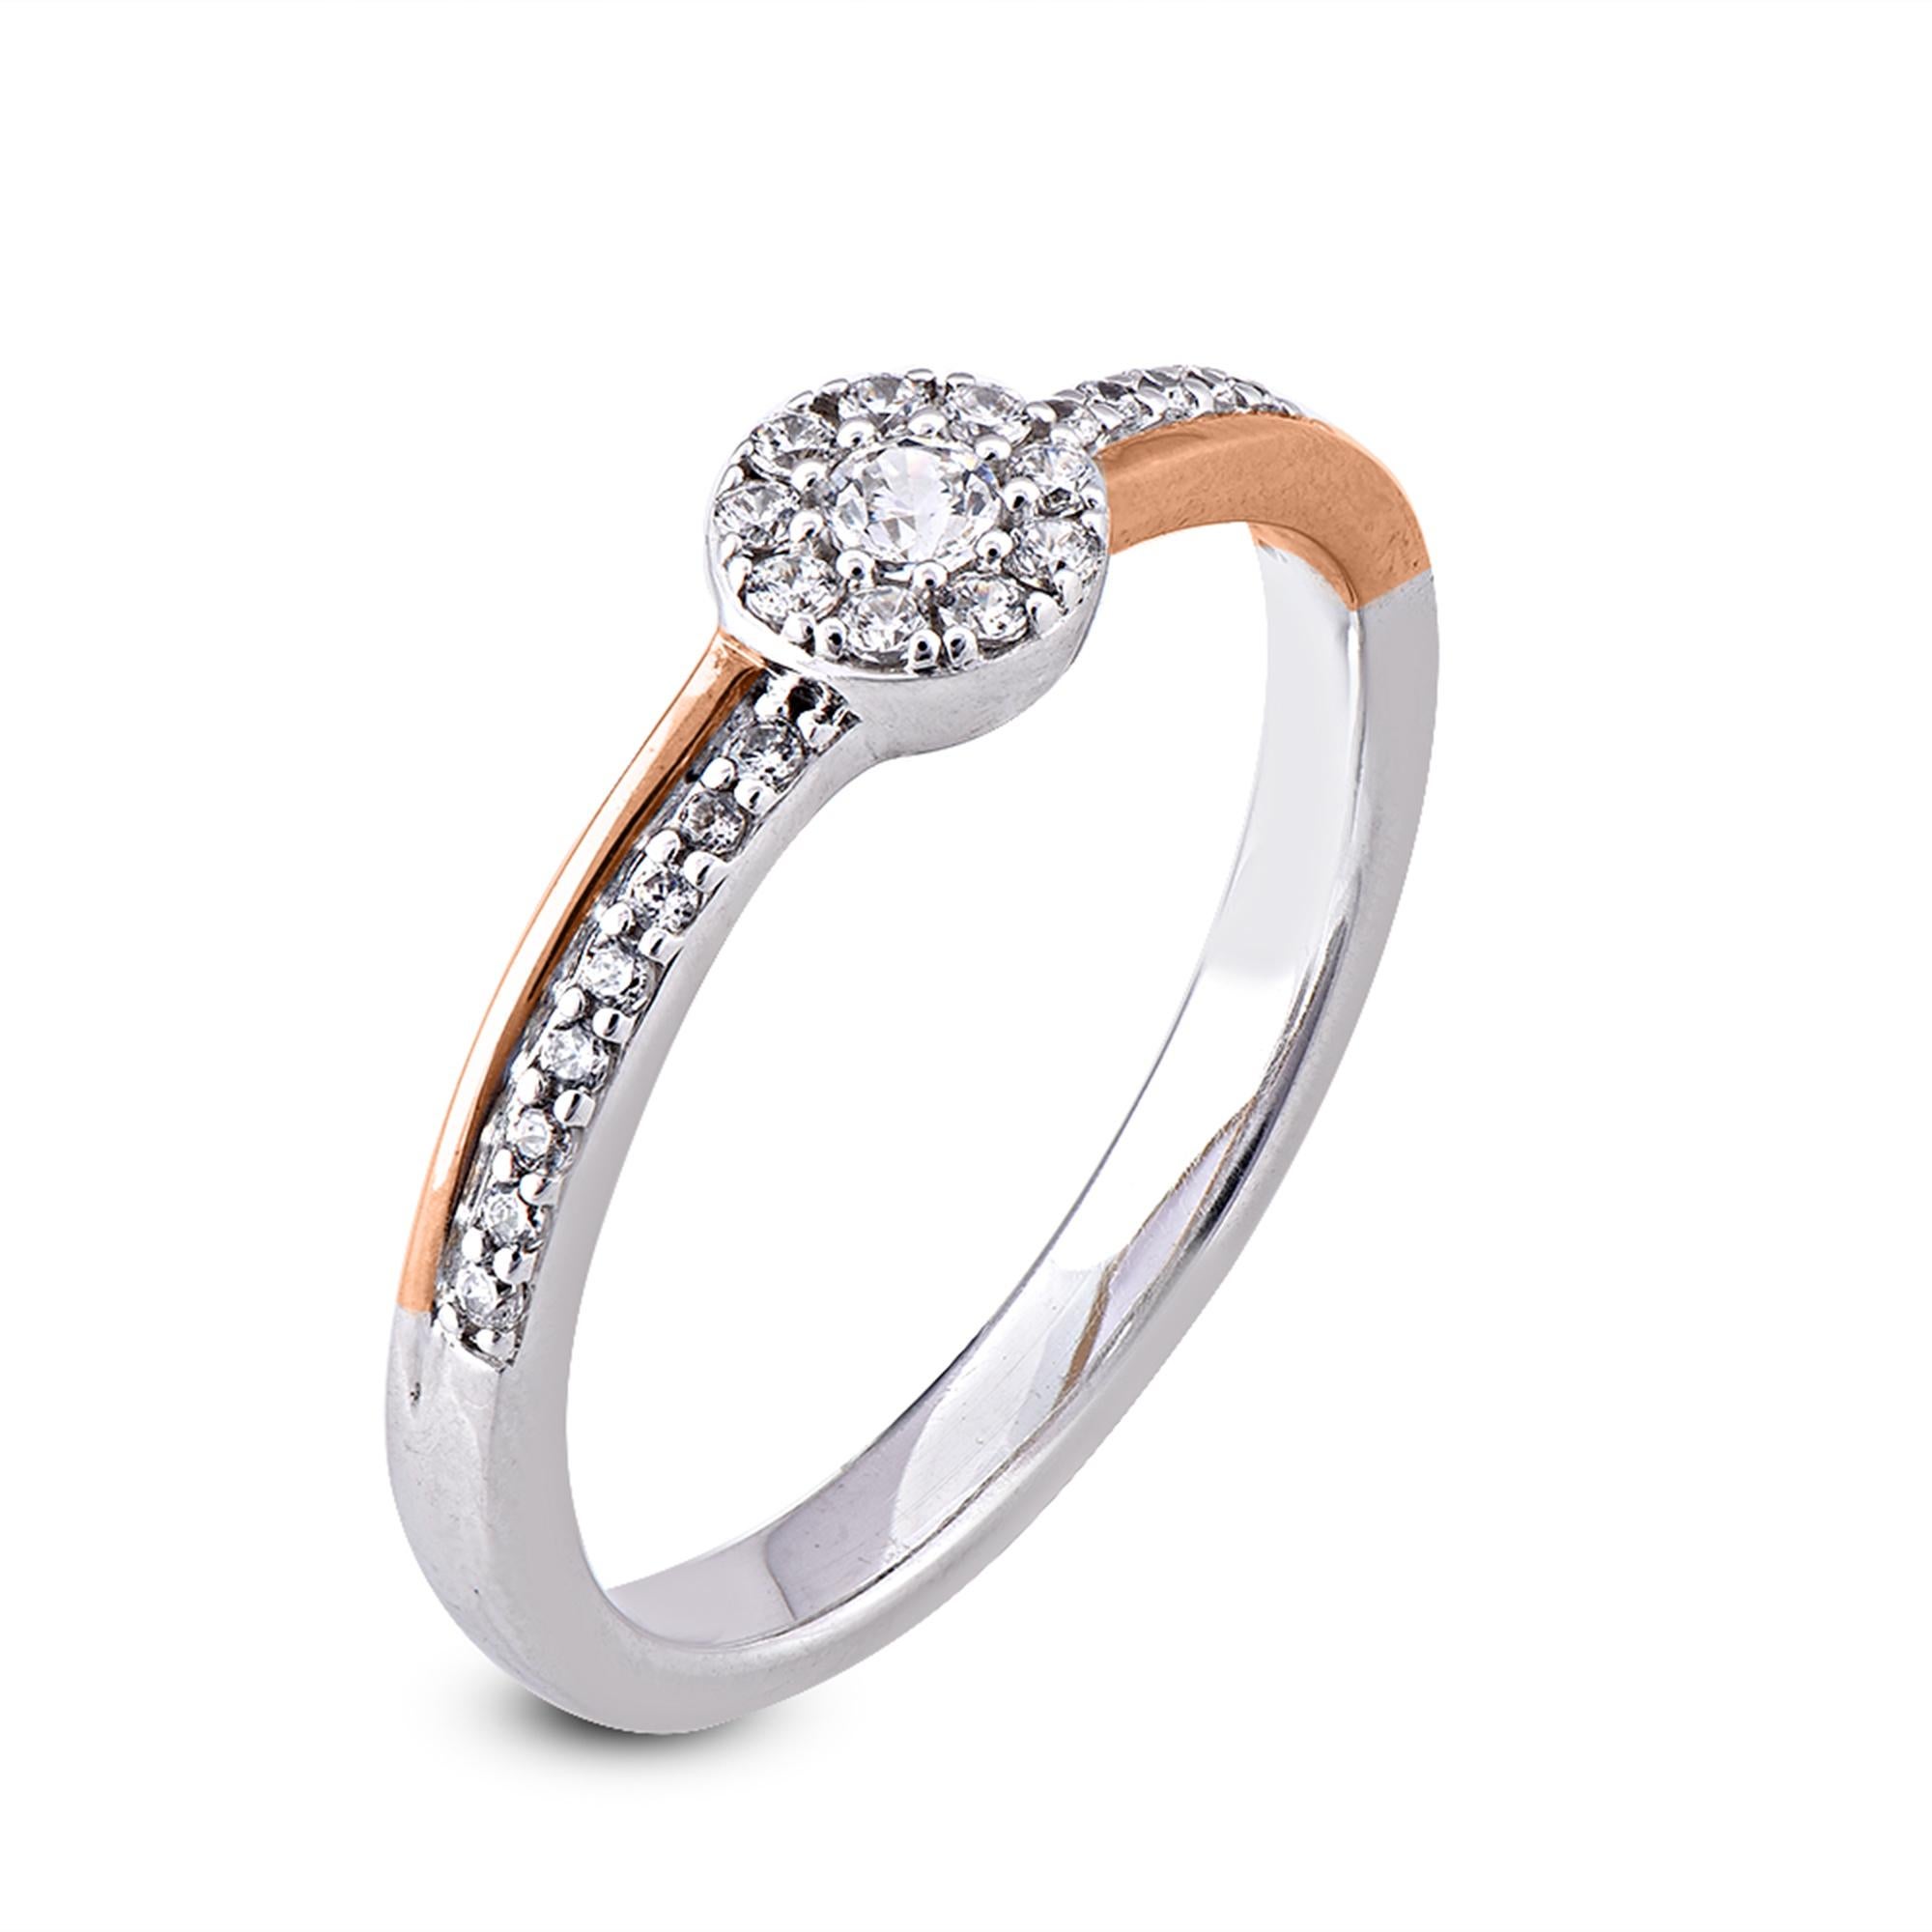 This ring dazzles with 0.25ct diamonds shimmering 26 round white diamonds set in prong setting. We only use 100% natural and conflict free diamonds which sparkles in H-I color I2 clarity. This 14 karat white and Rose gold engagement ring is a lovely